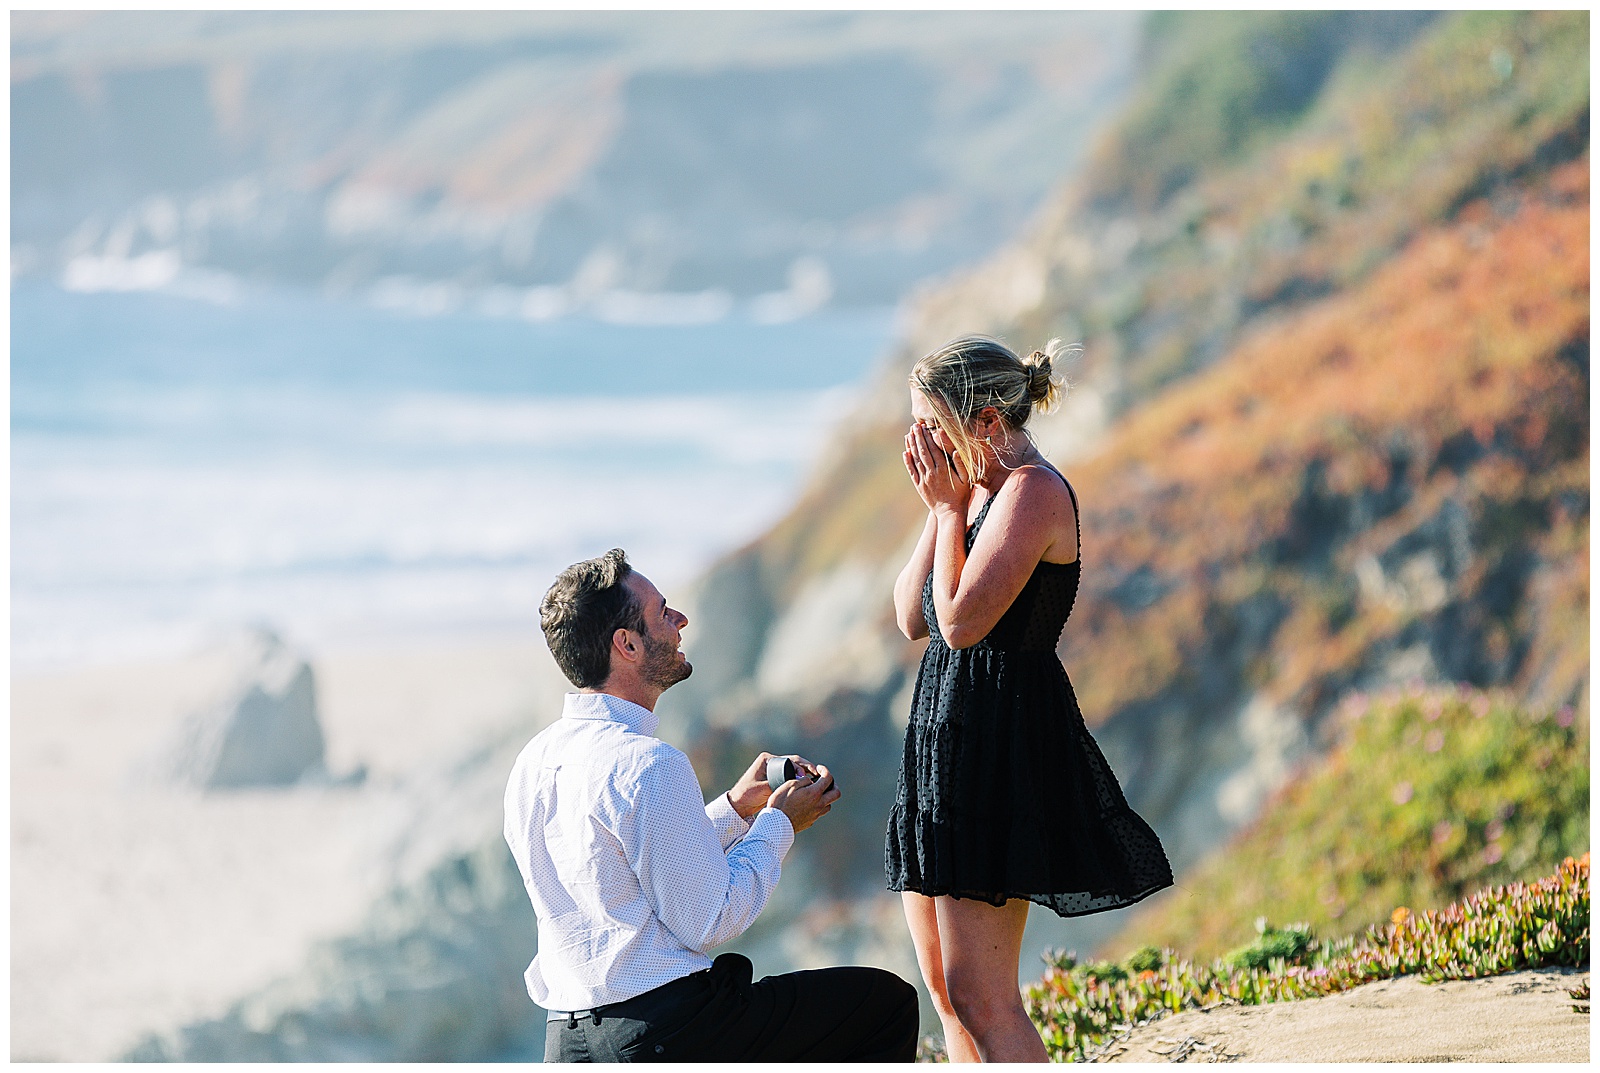 Photo of Man proposing to woman by film photographer AGS Photo Art